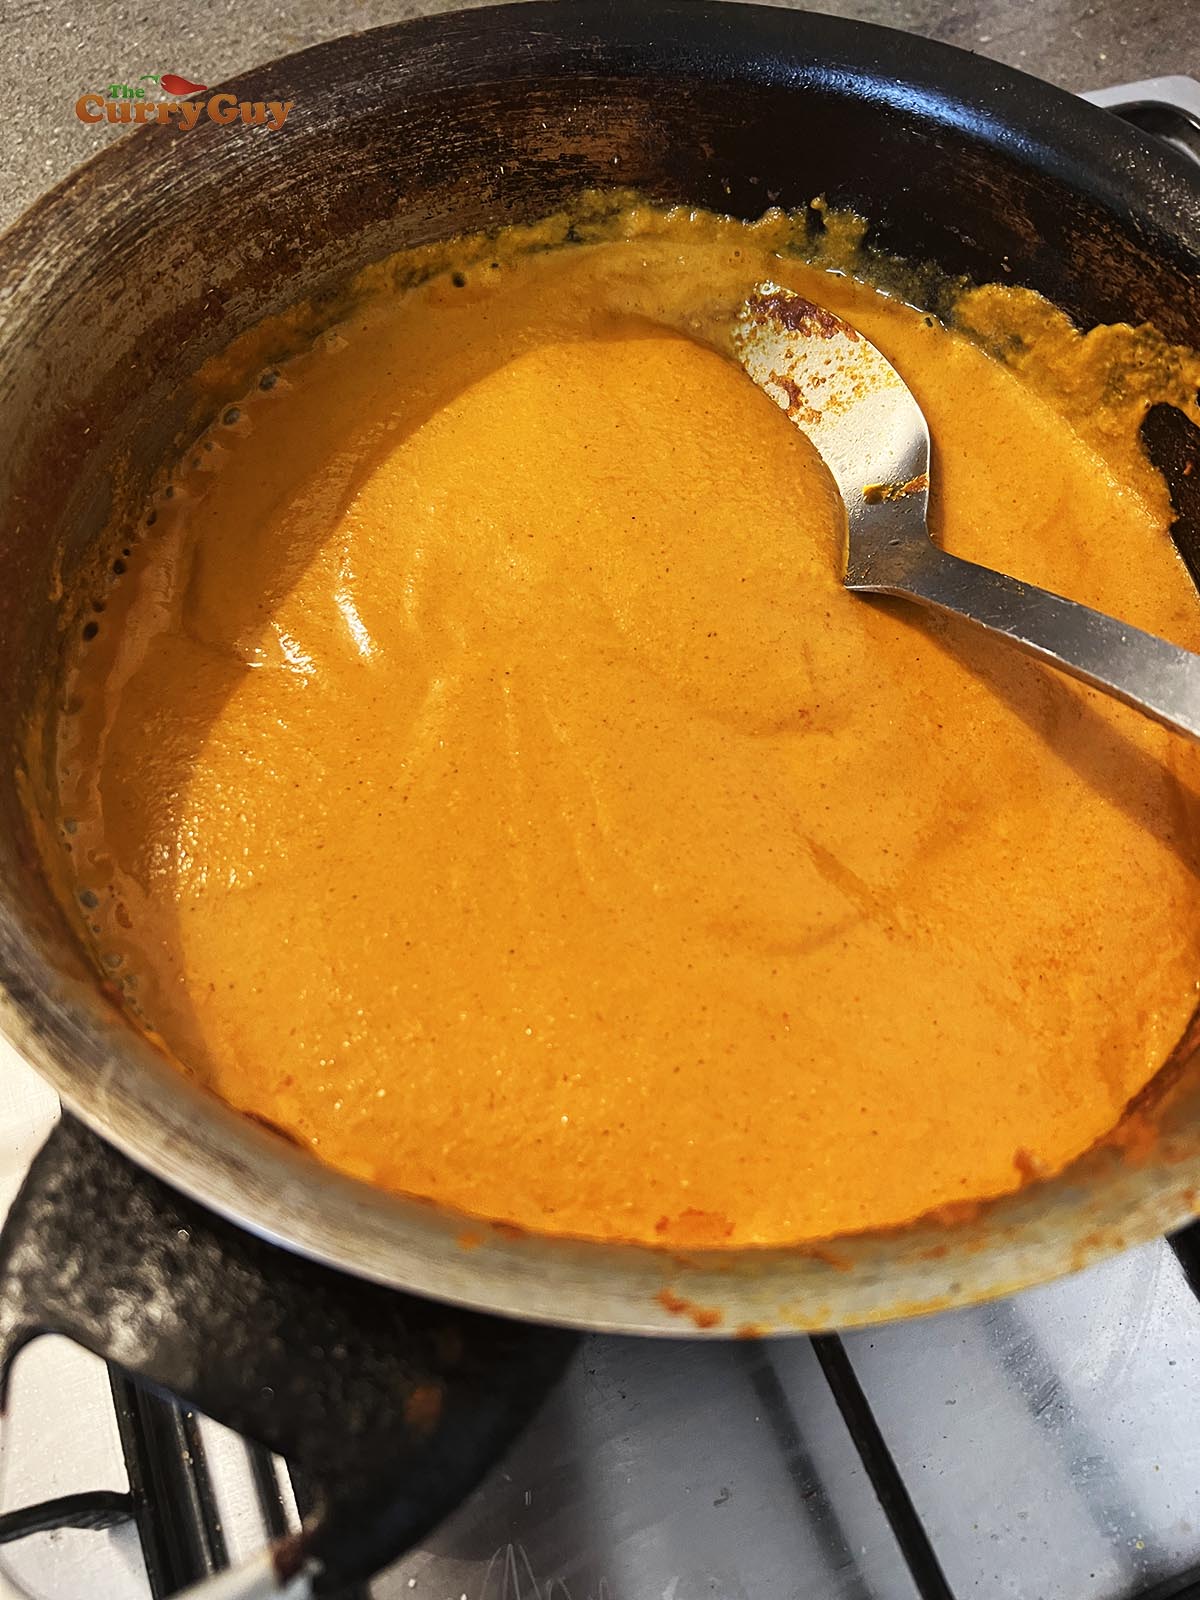 Returning blended sauce to the pan